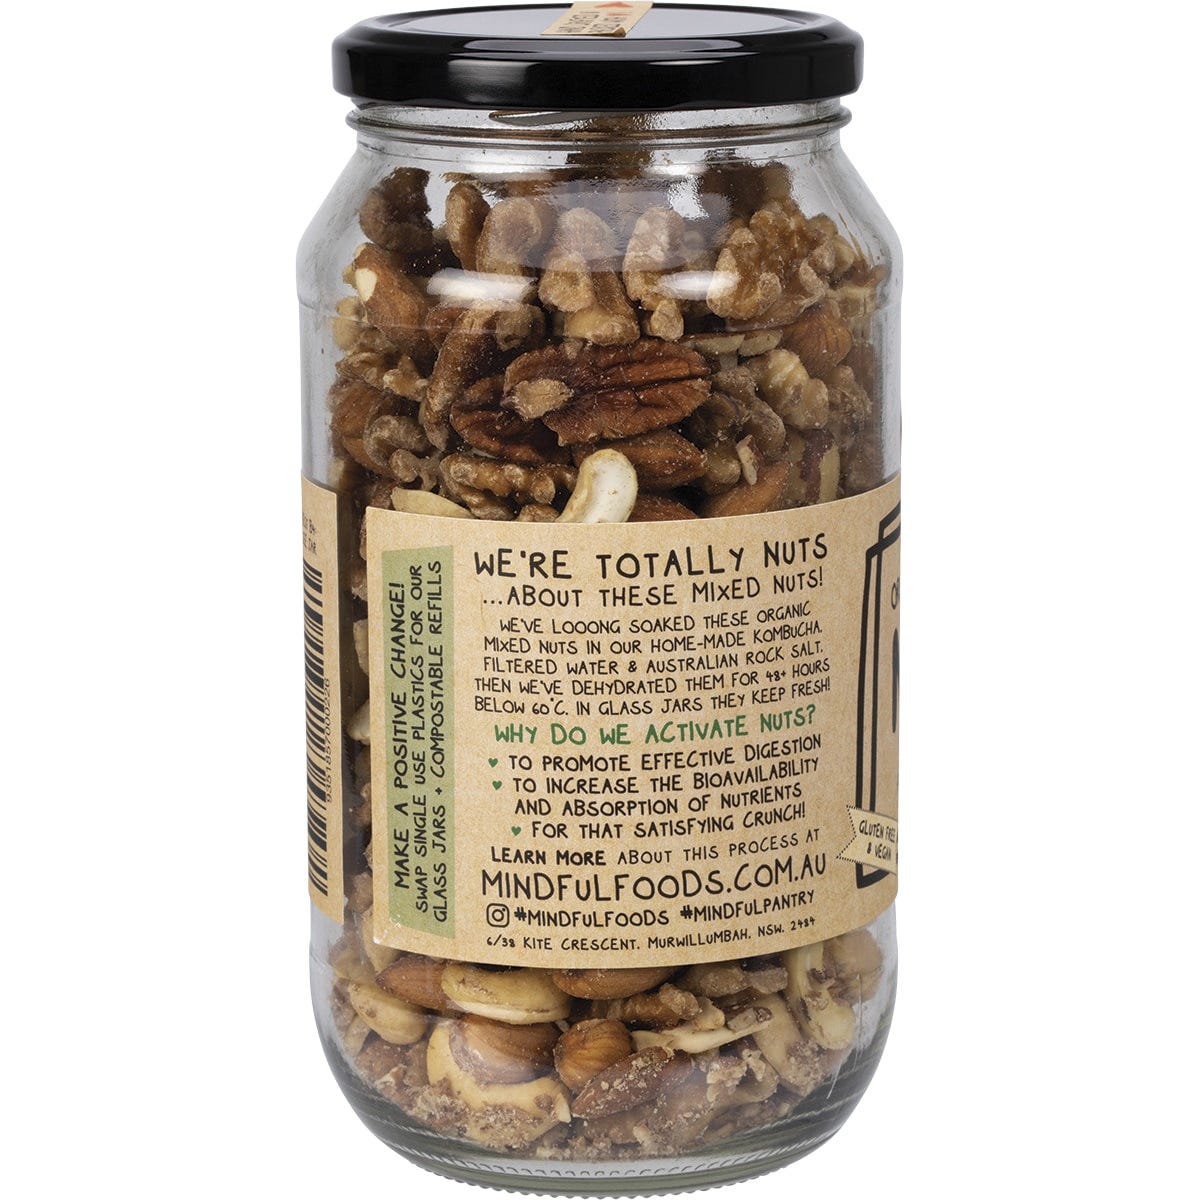 Mindful Foods Mixed Nuts Organic & Activated